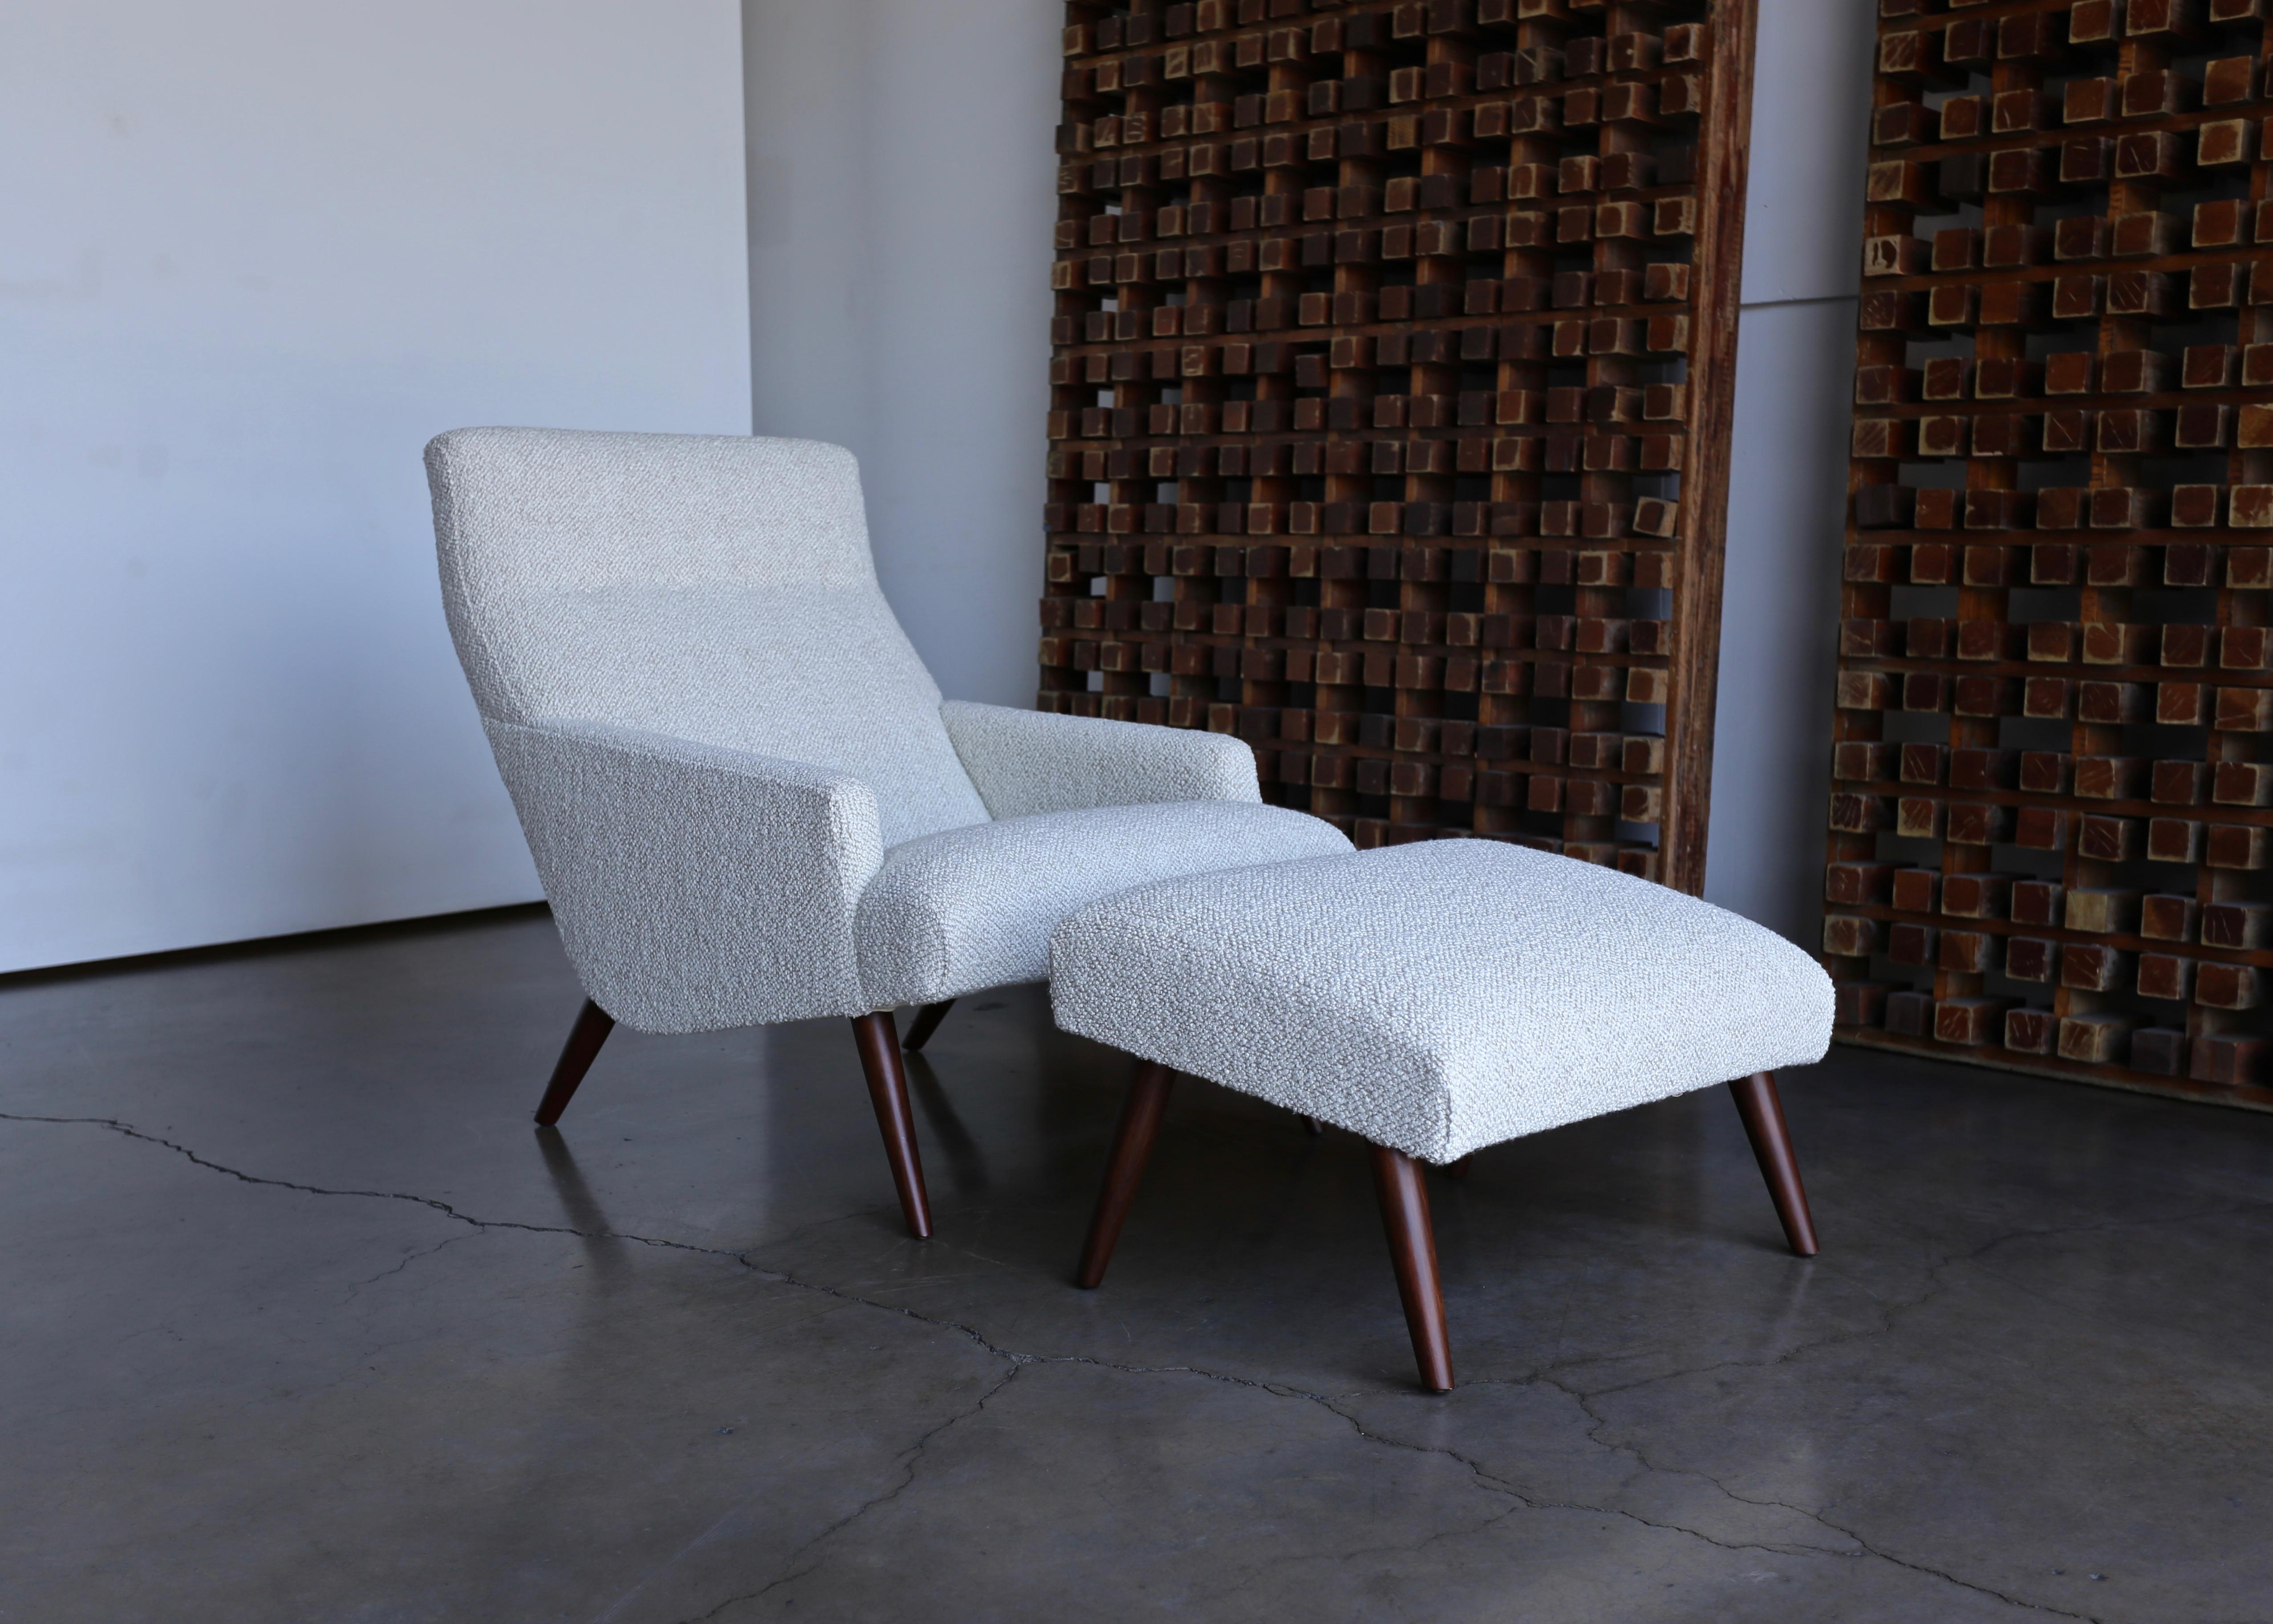 Lounge chair & ottoman, circa 1960. This piece has been professionally restored.

The ottoman measures: 24.5